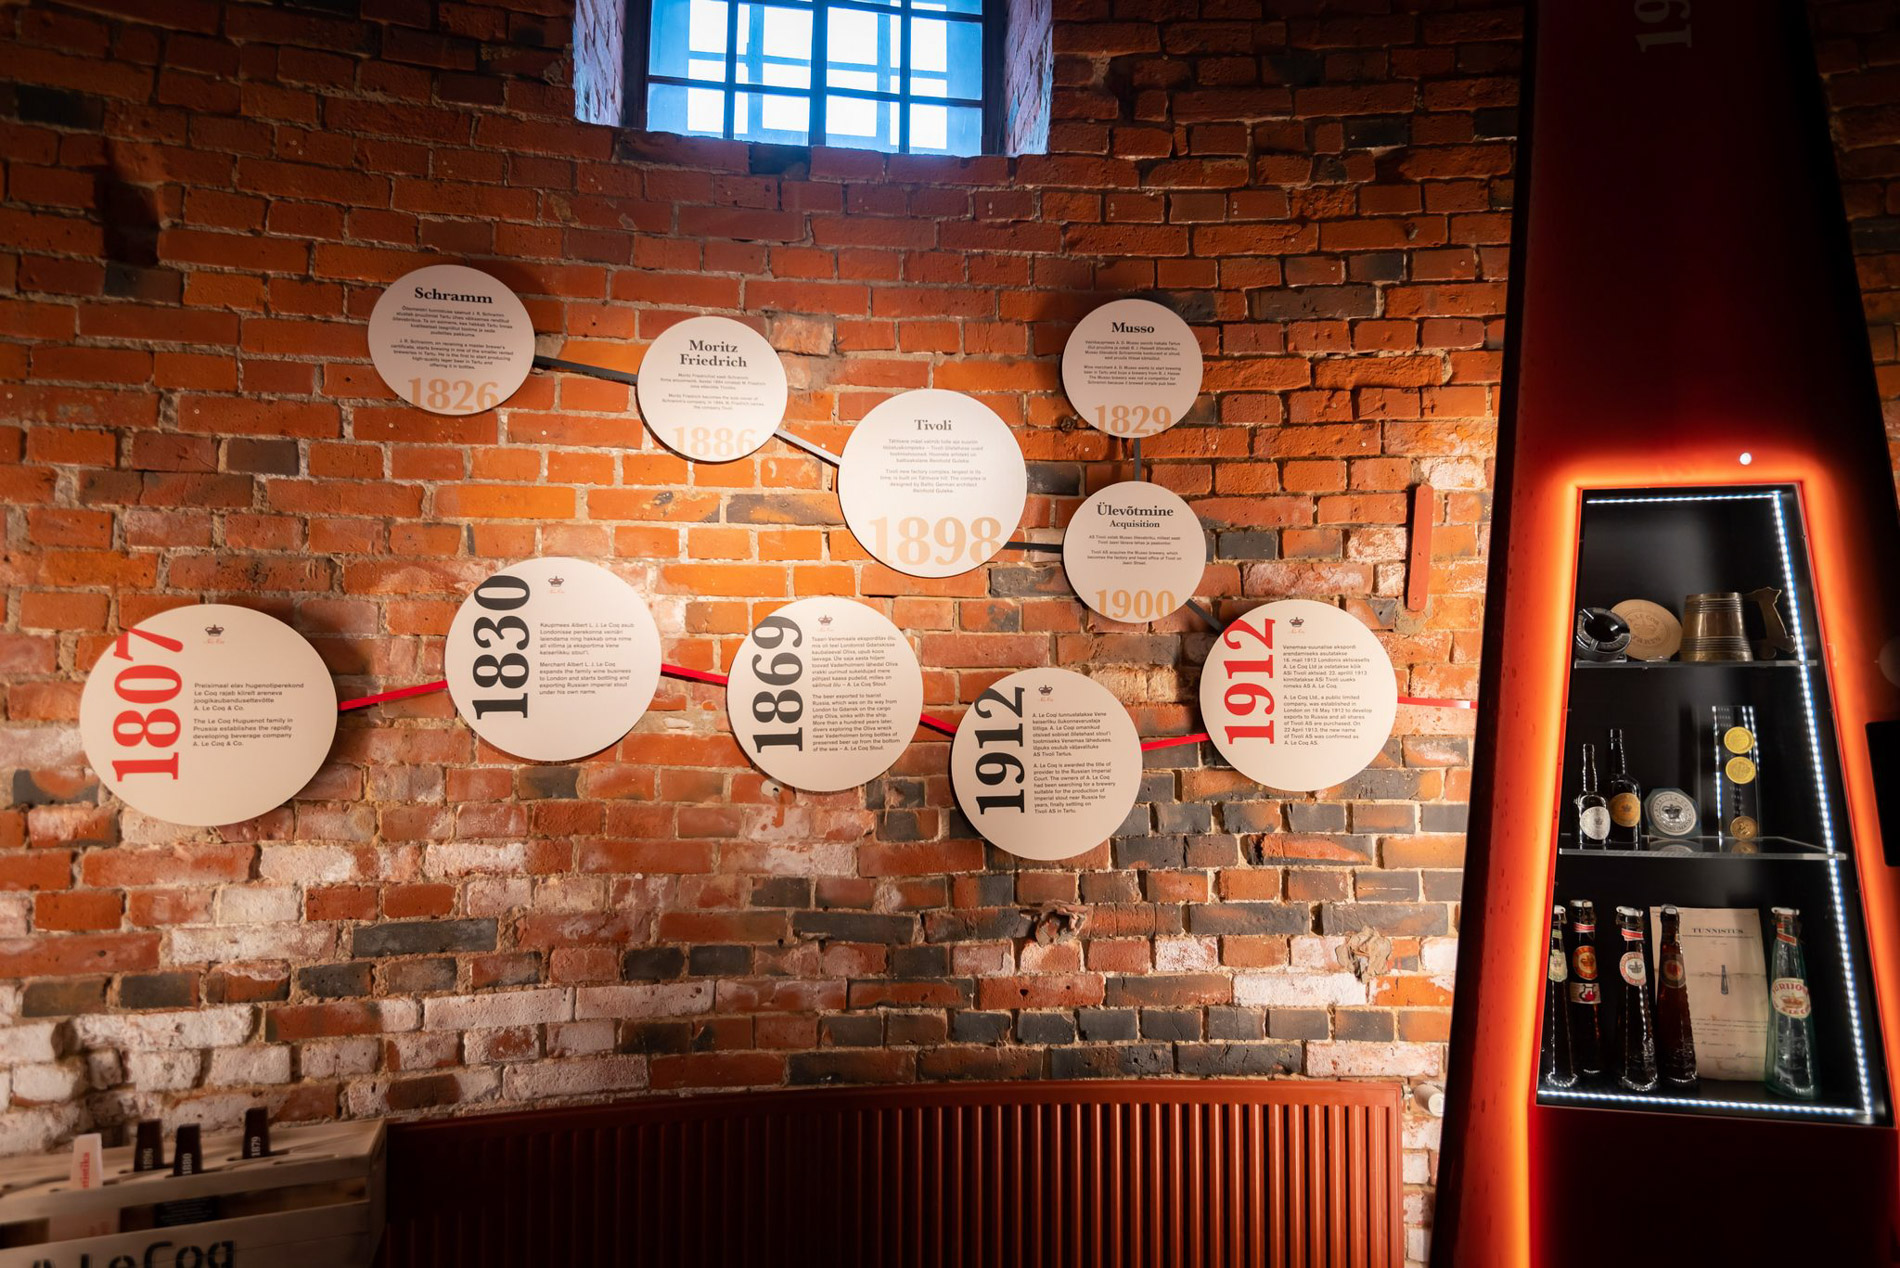 A new experience centre called The World of Beer, located at the famous A. Le Coq beer factory in Tartu, tells the story of beer culture as well as the history of the legendary brewery.